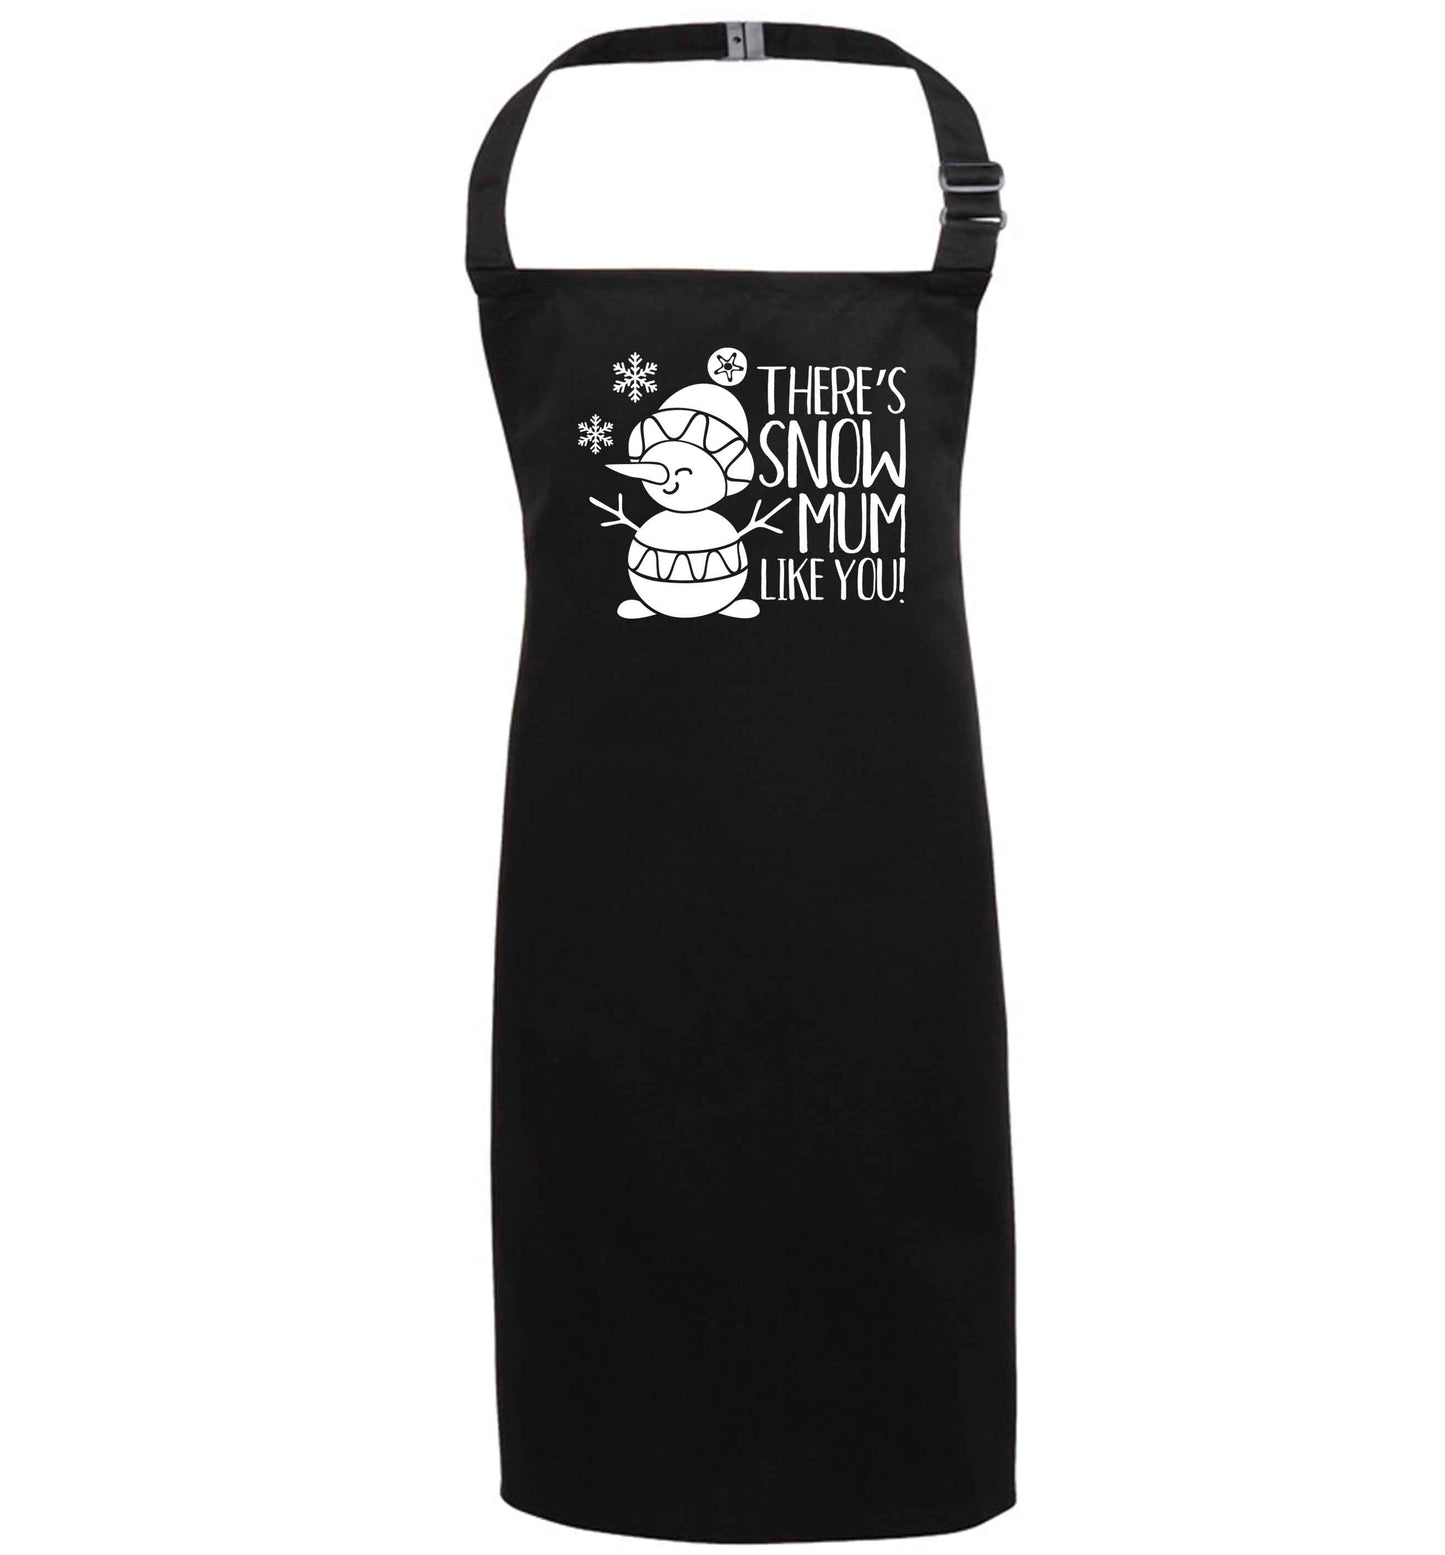 There's snow mum like you black apron 7-10 years